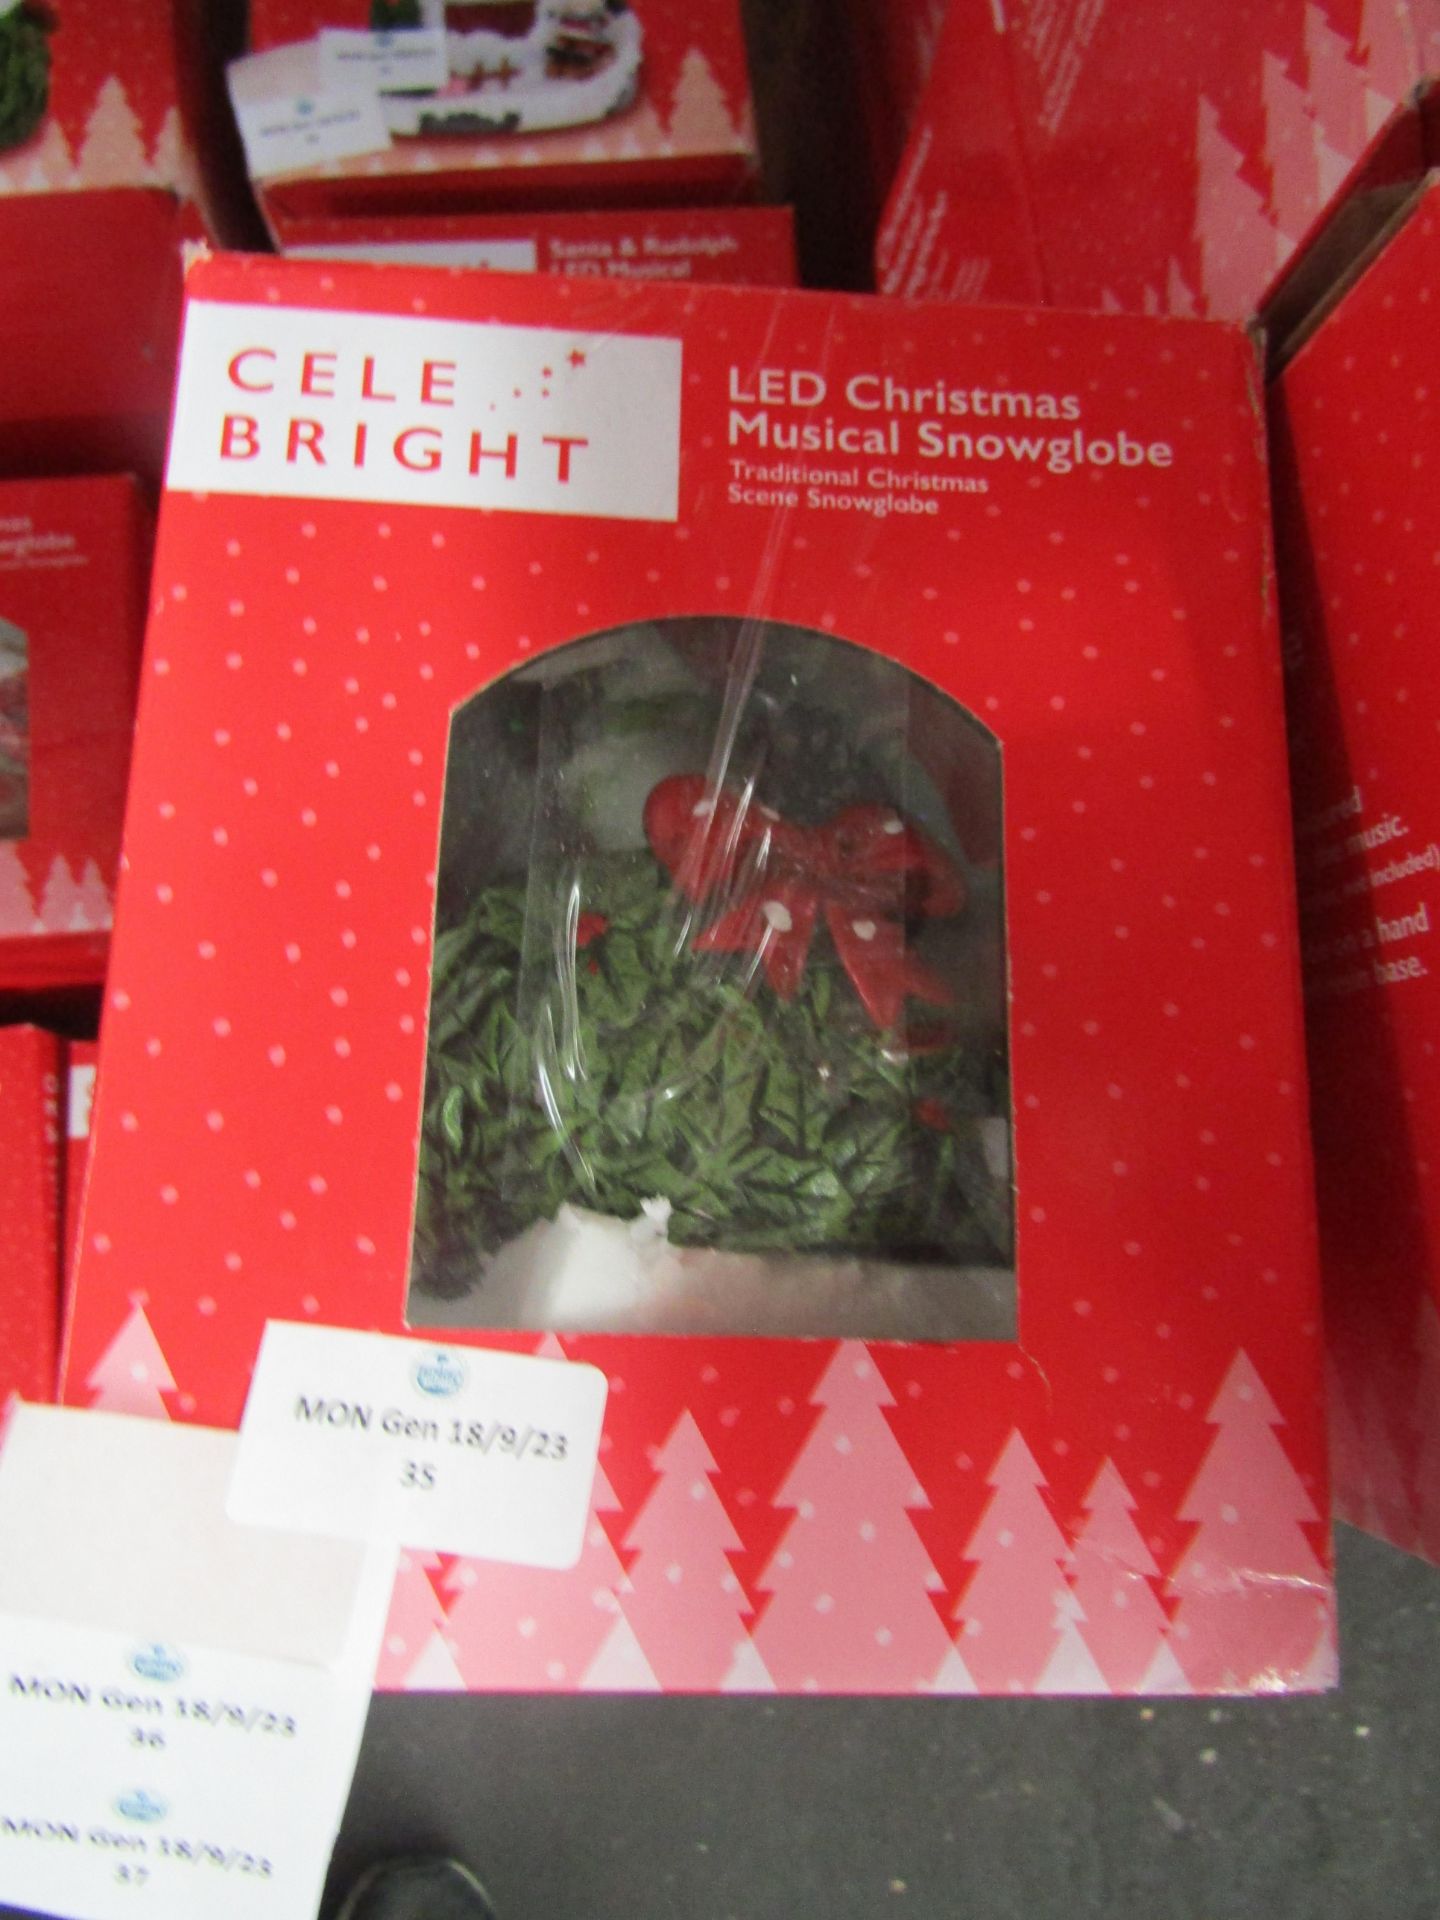 Celebright - LED Christmas Musical Snowglobe - Looks In Good Condition & Boxed.